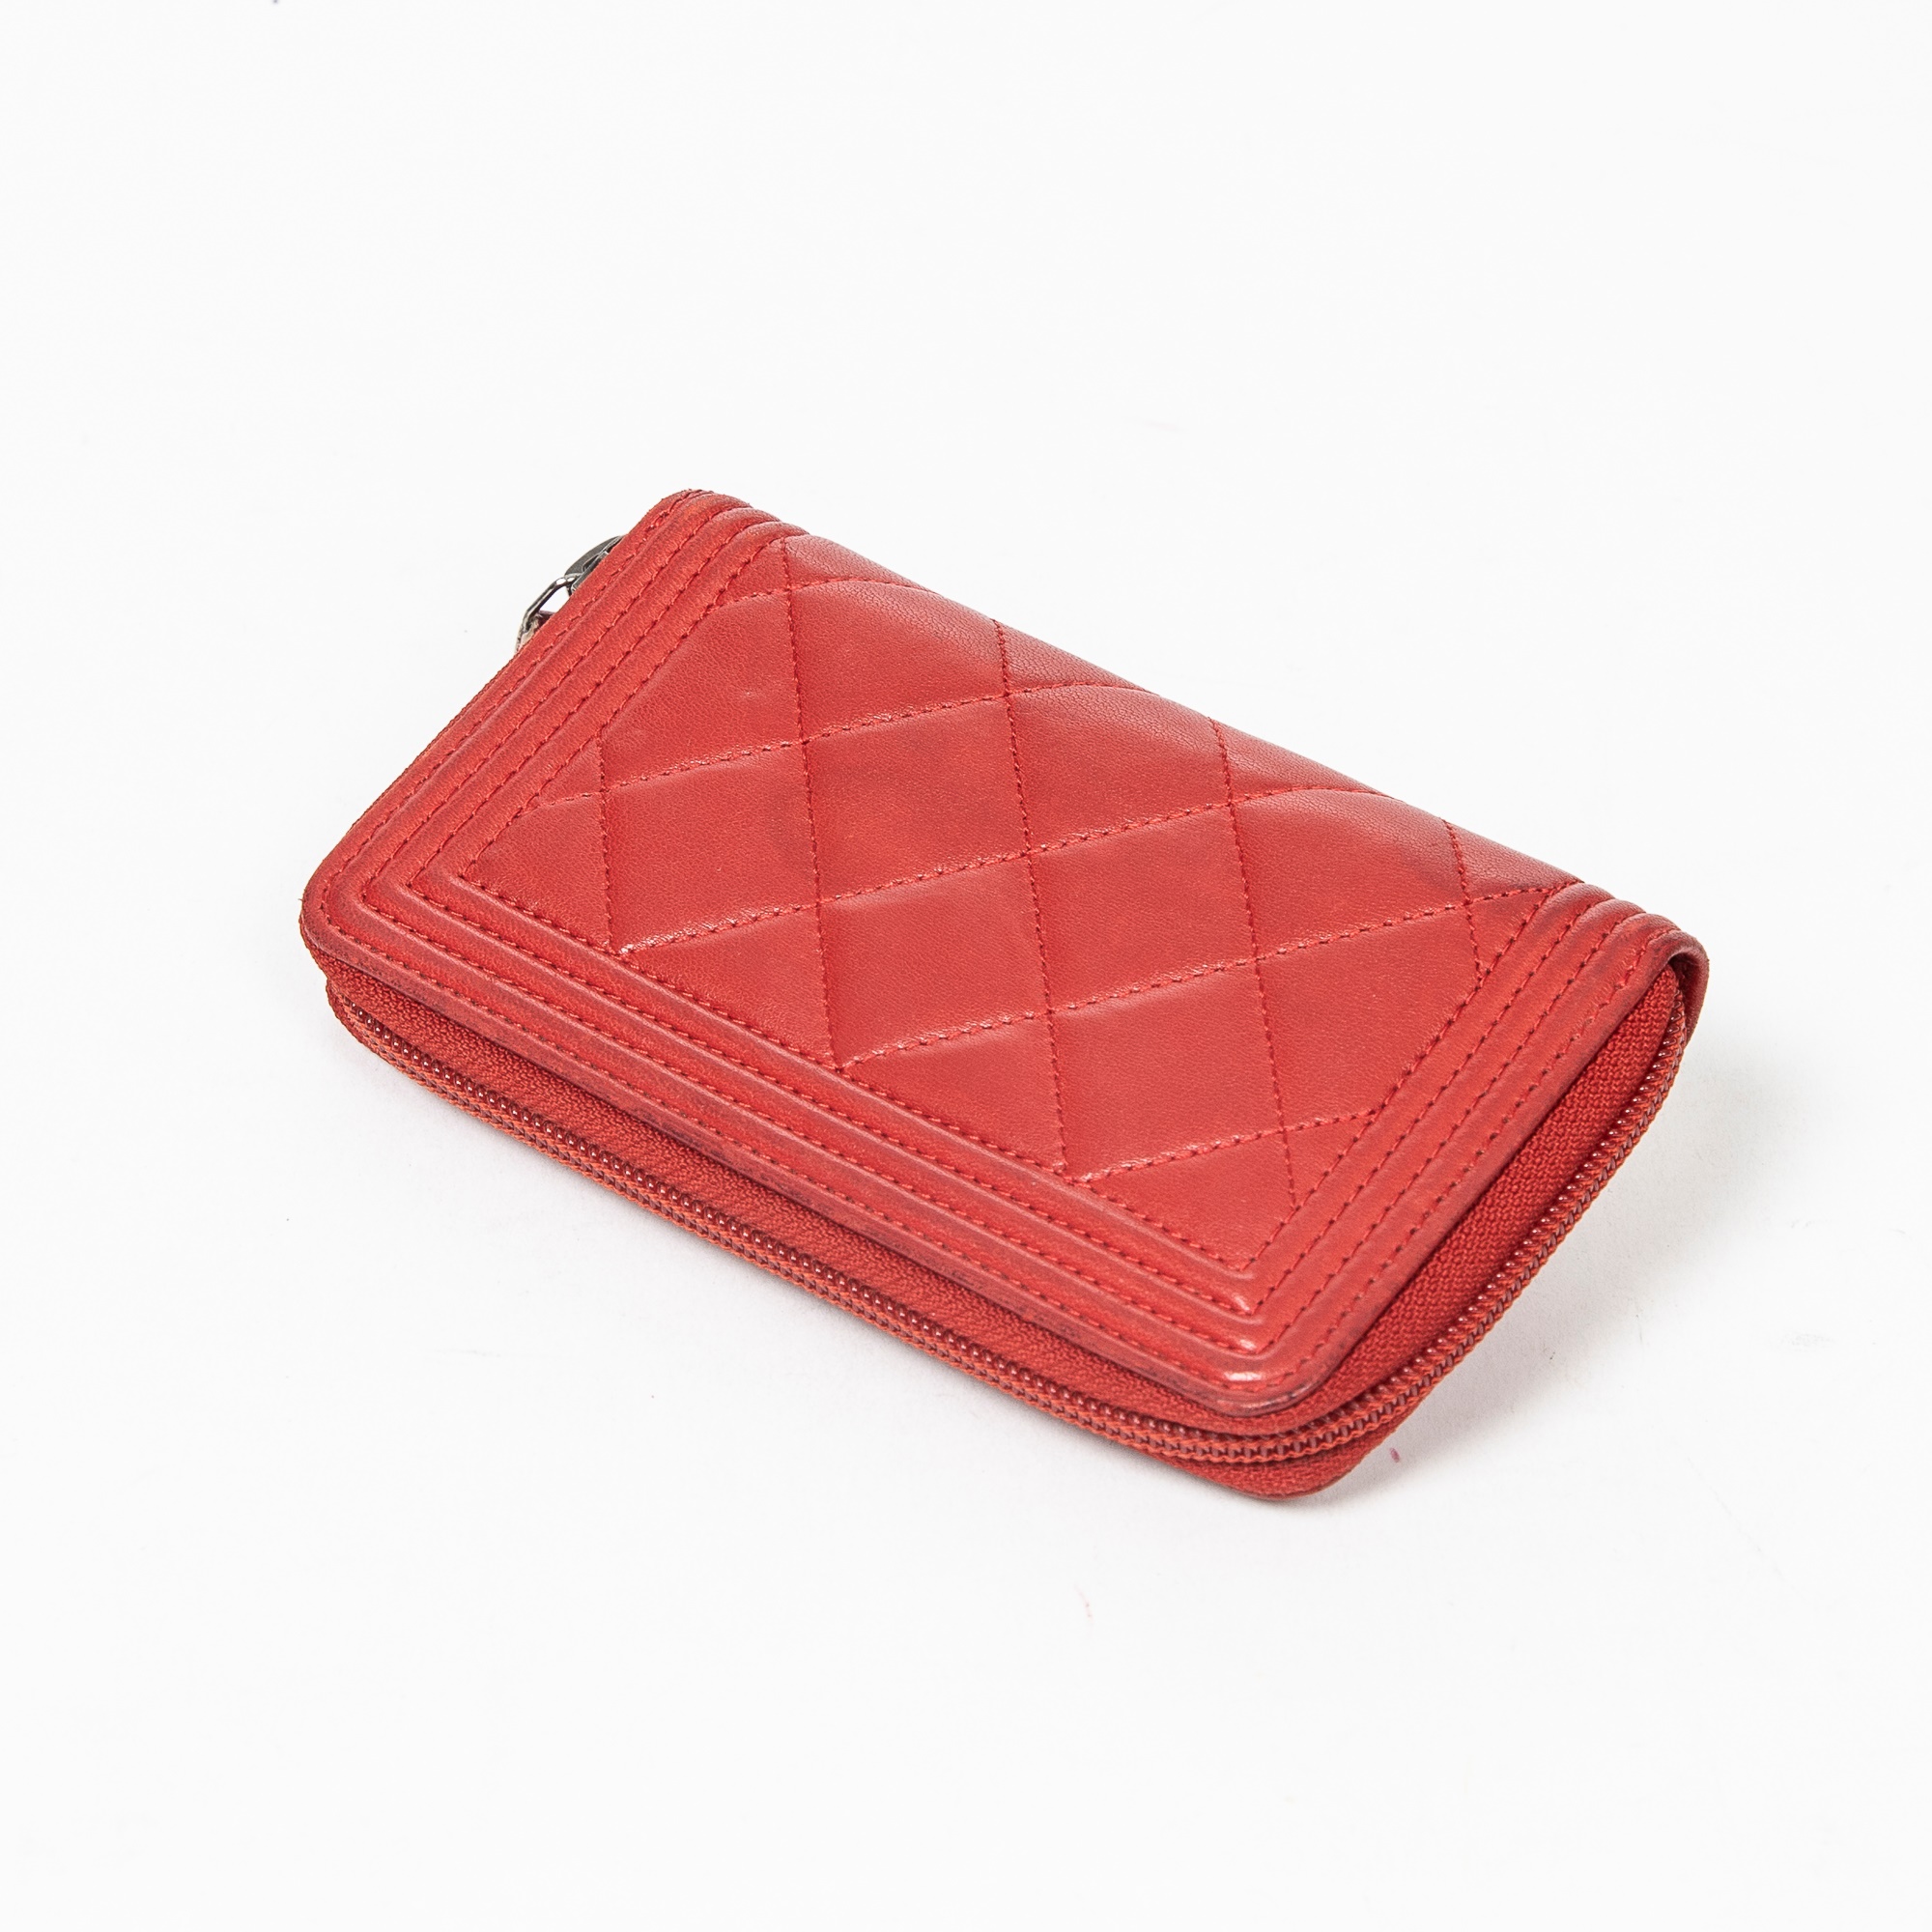 Chanel Red Boy Wallet - Image 2 of 3